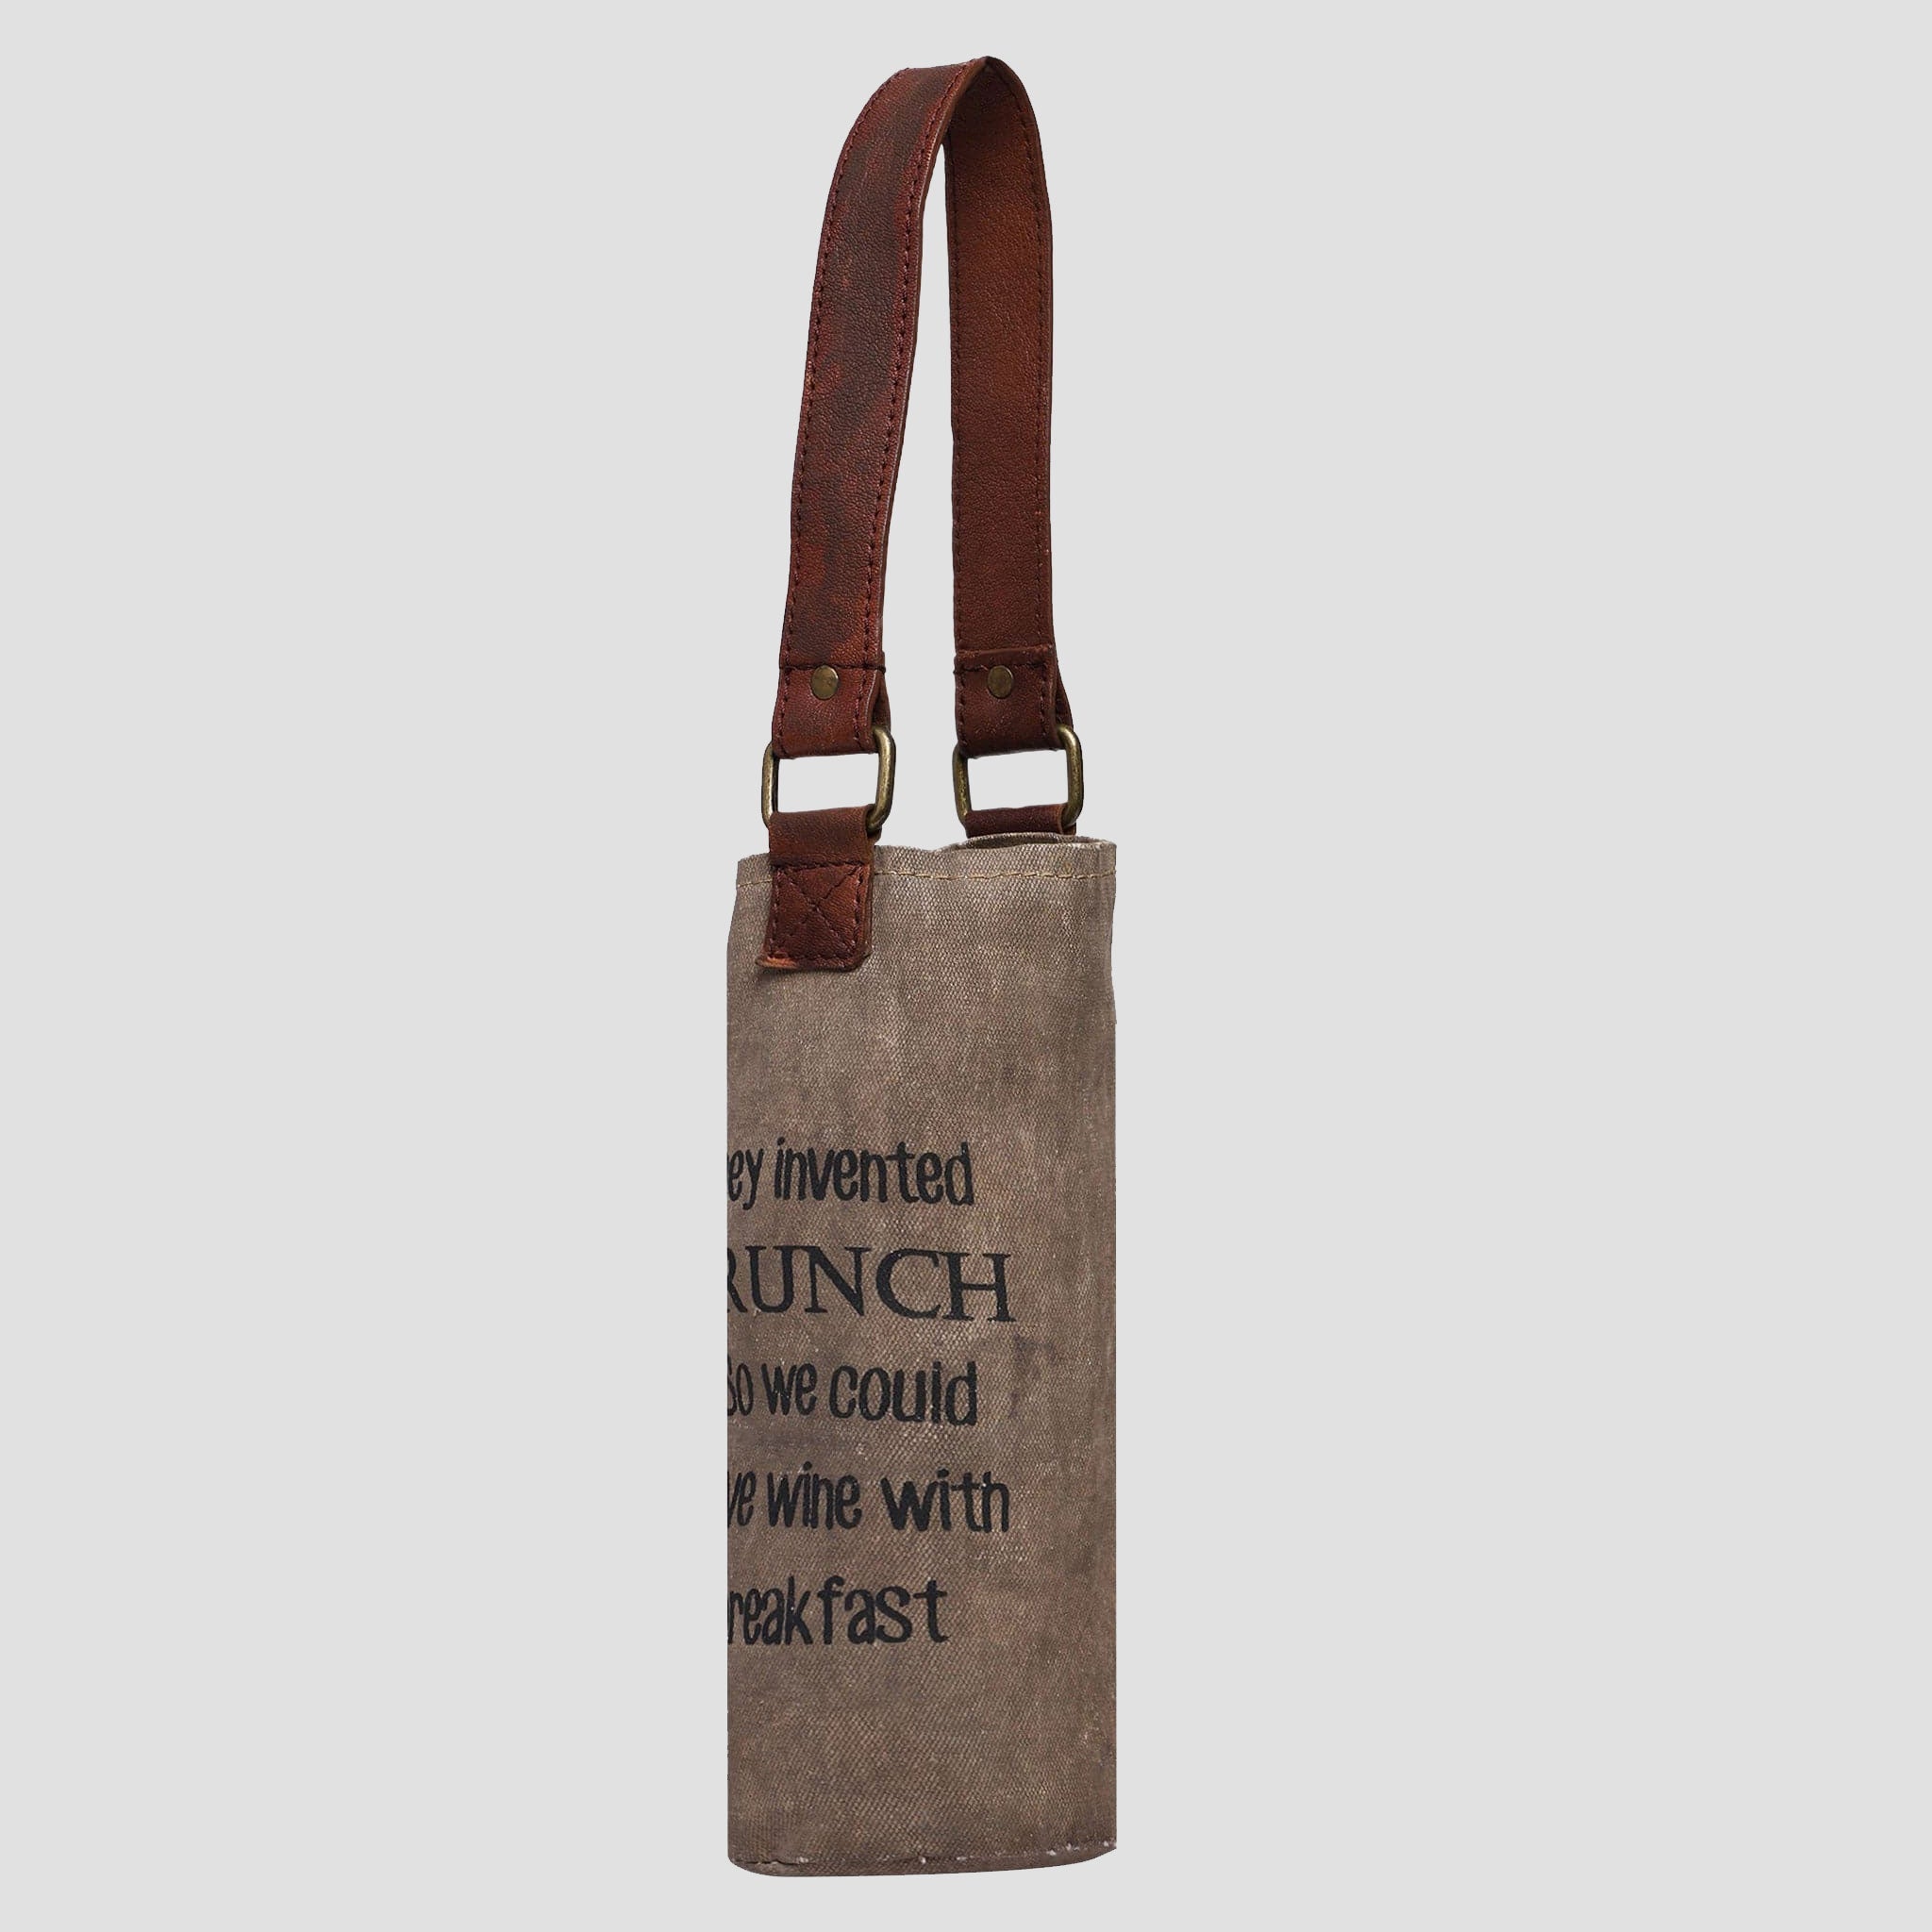 Mona B 100% Canvas Wine Bags Perfect to give as a Gift or for Yourself as You New go-to Wine Bag (Brunch) - Drinkware by Mona-B - Backpack, EOSS, Sale, Shop1999, Shop2999, Shop3999